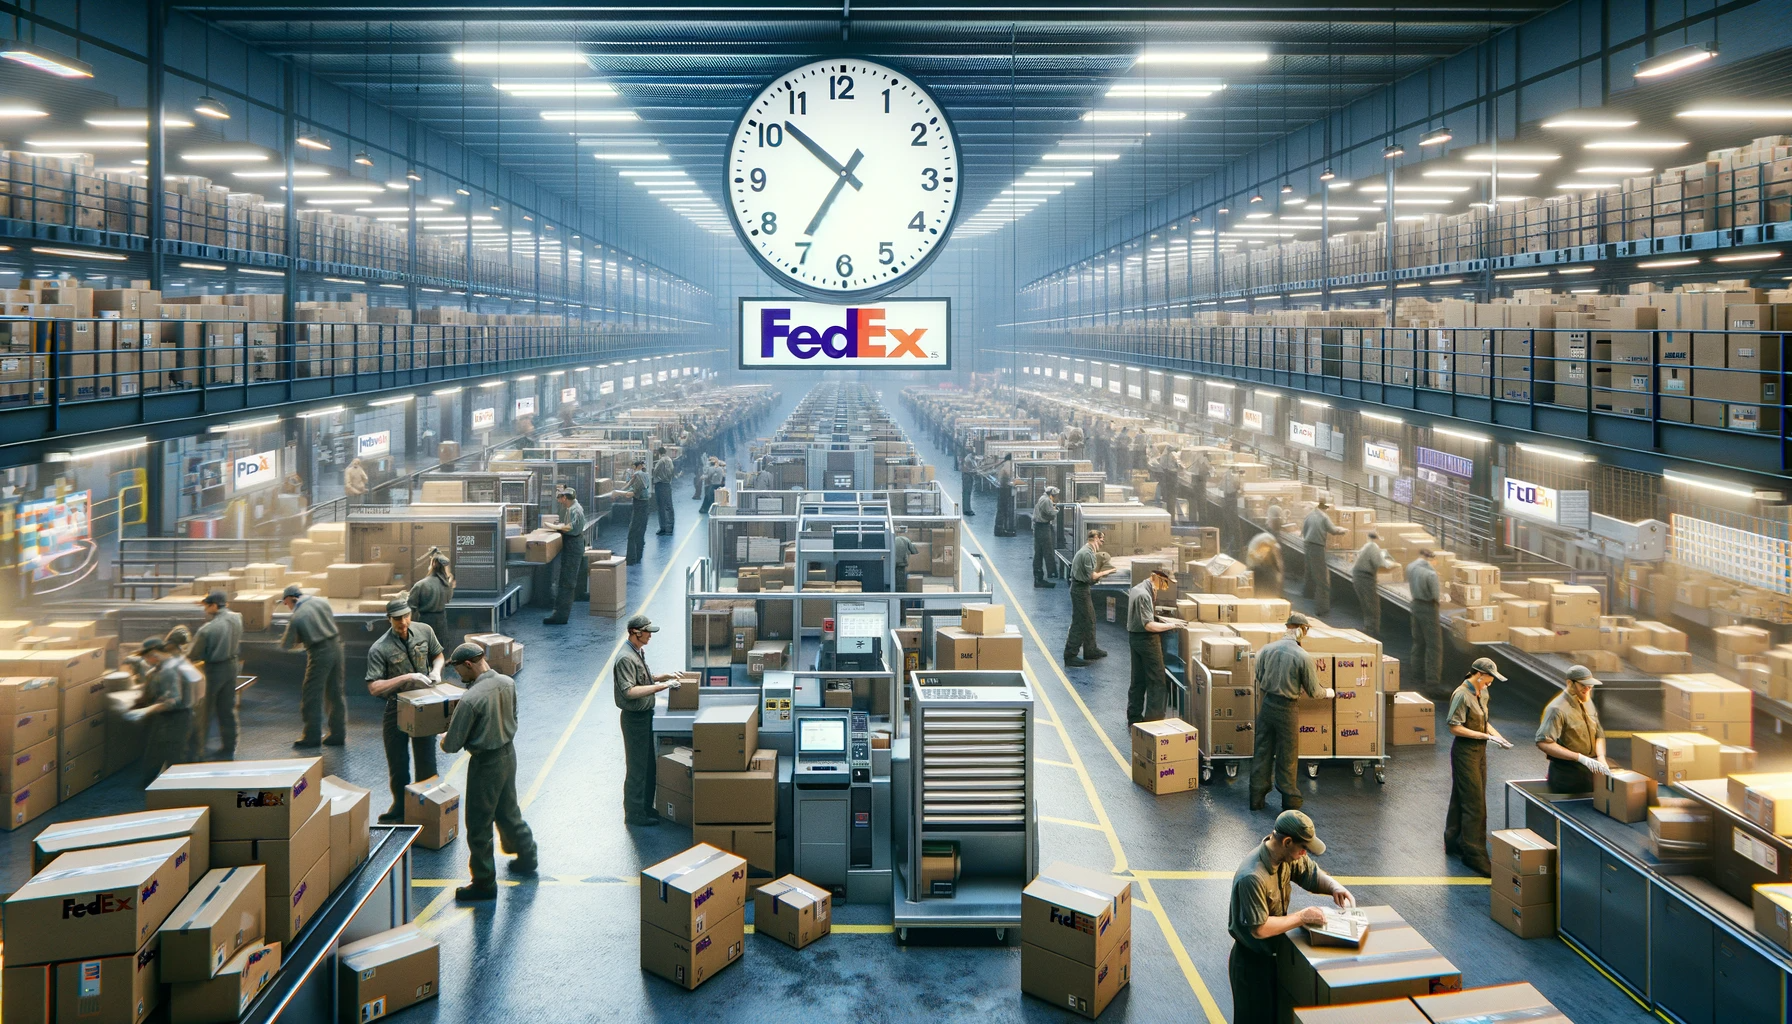 DALL·E 2023-11-23 05.53.15 - A realistic photo-style image of a busy FedEx sorting facility. The scene is during peak season, showcasing a flurry of activity with workers sorting 